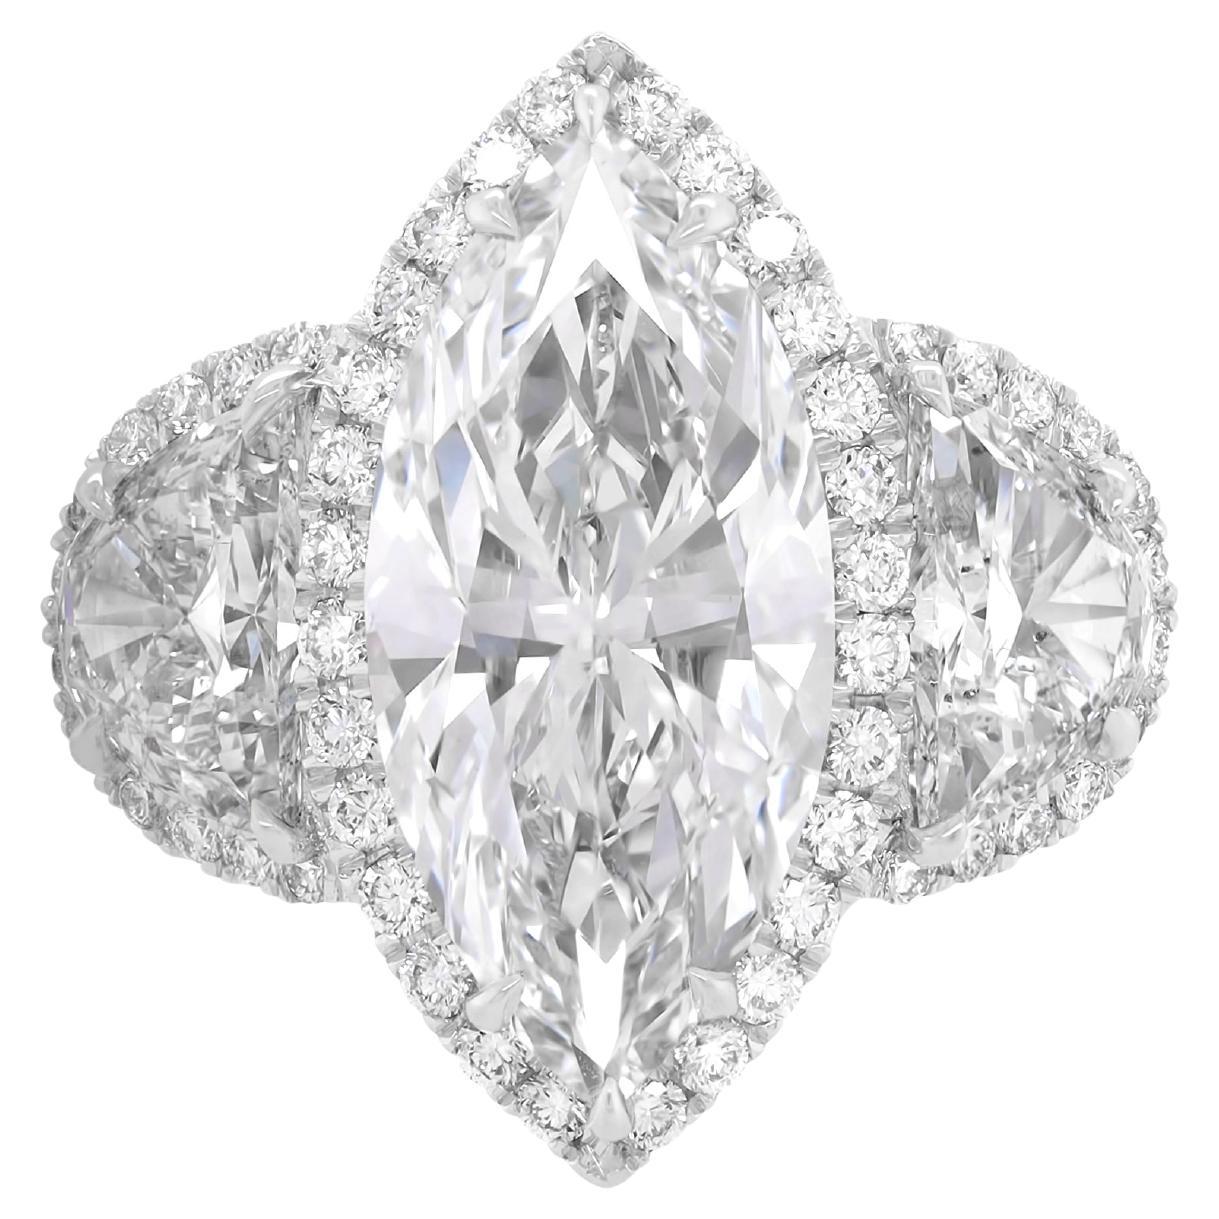 Diana M. 5.65 Carat E Color VS2 in Clarity Marquise Diamond Ring For Sale